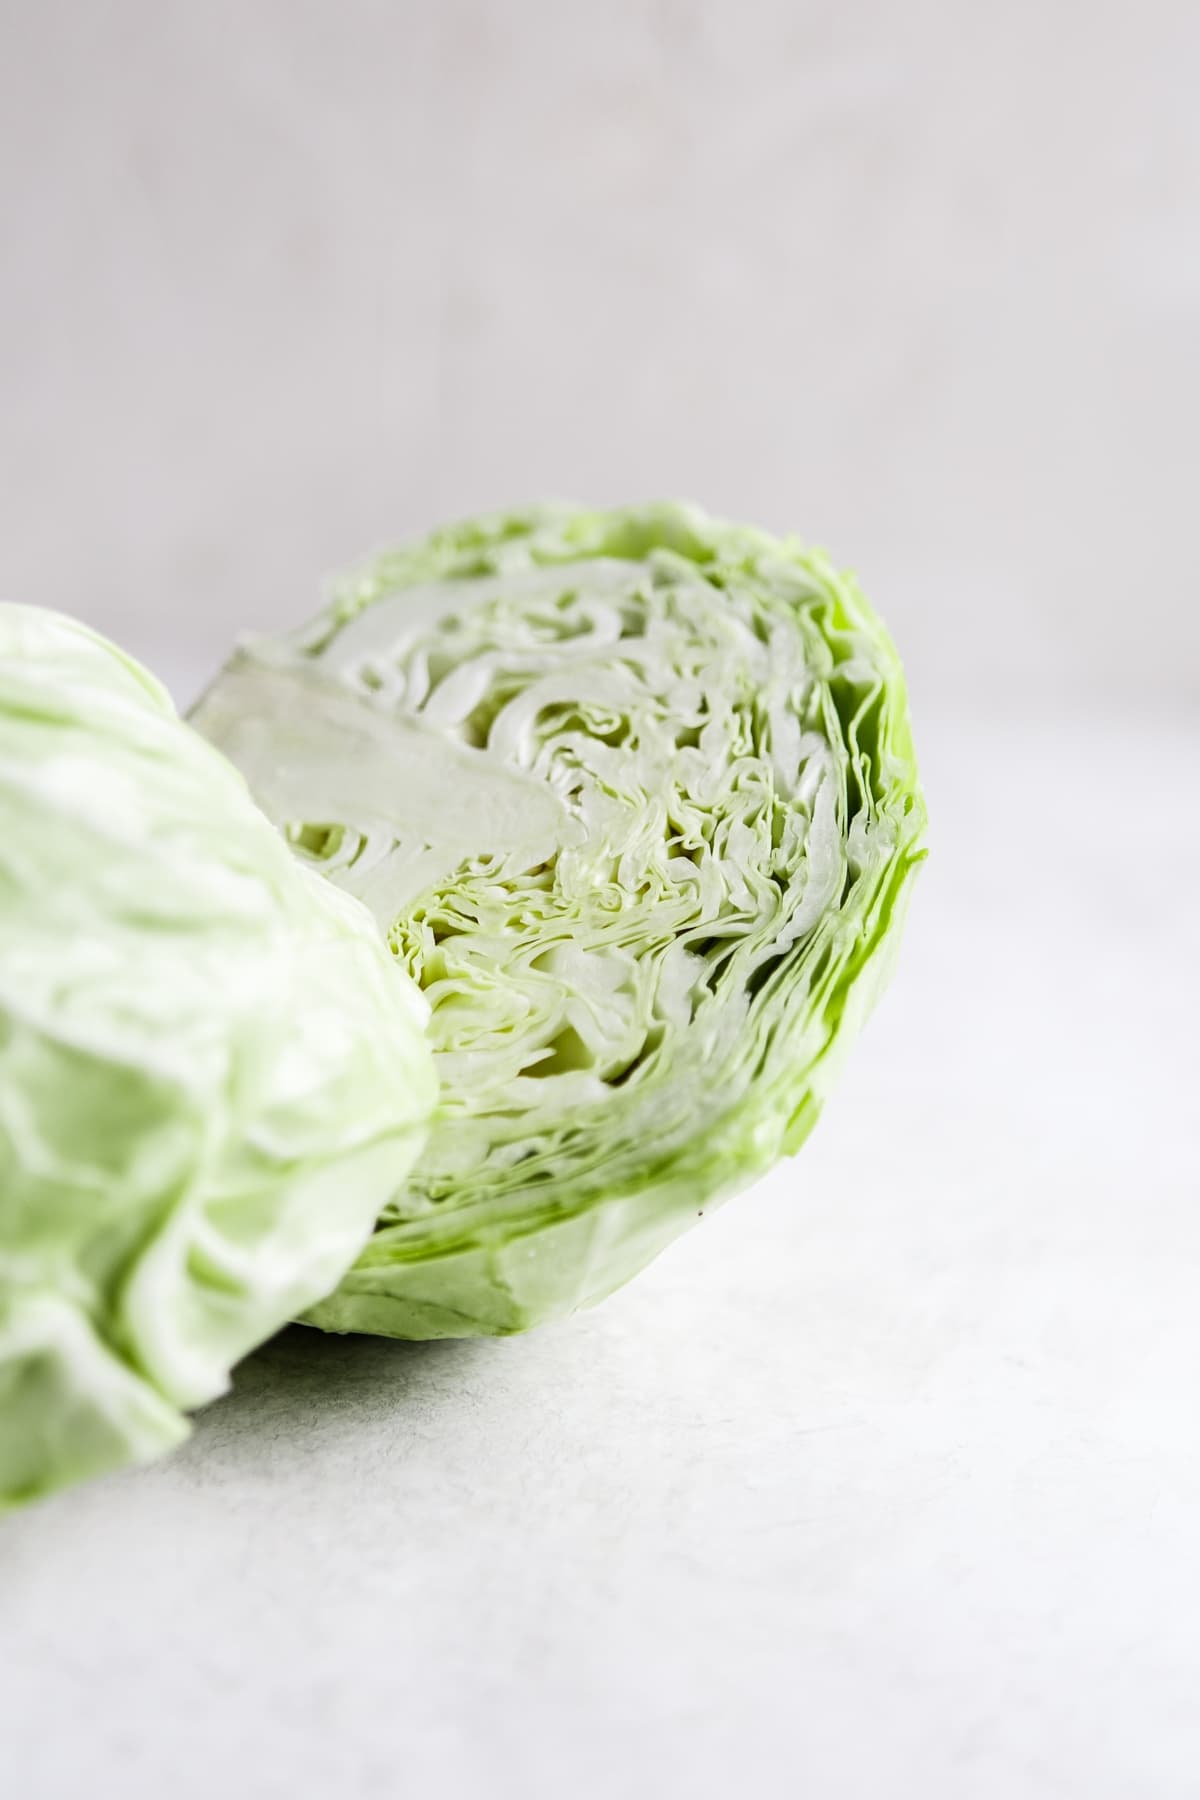 a head of green cabbage sliced in half